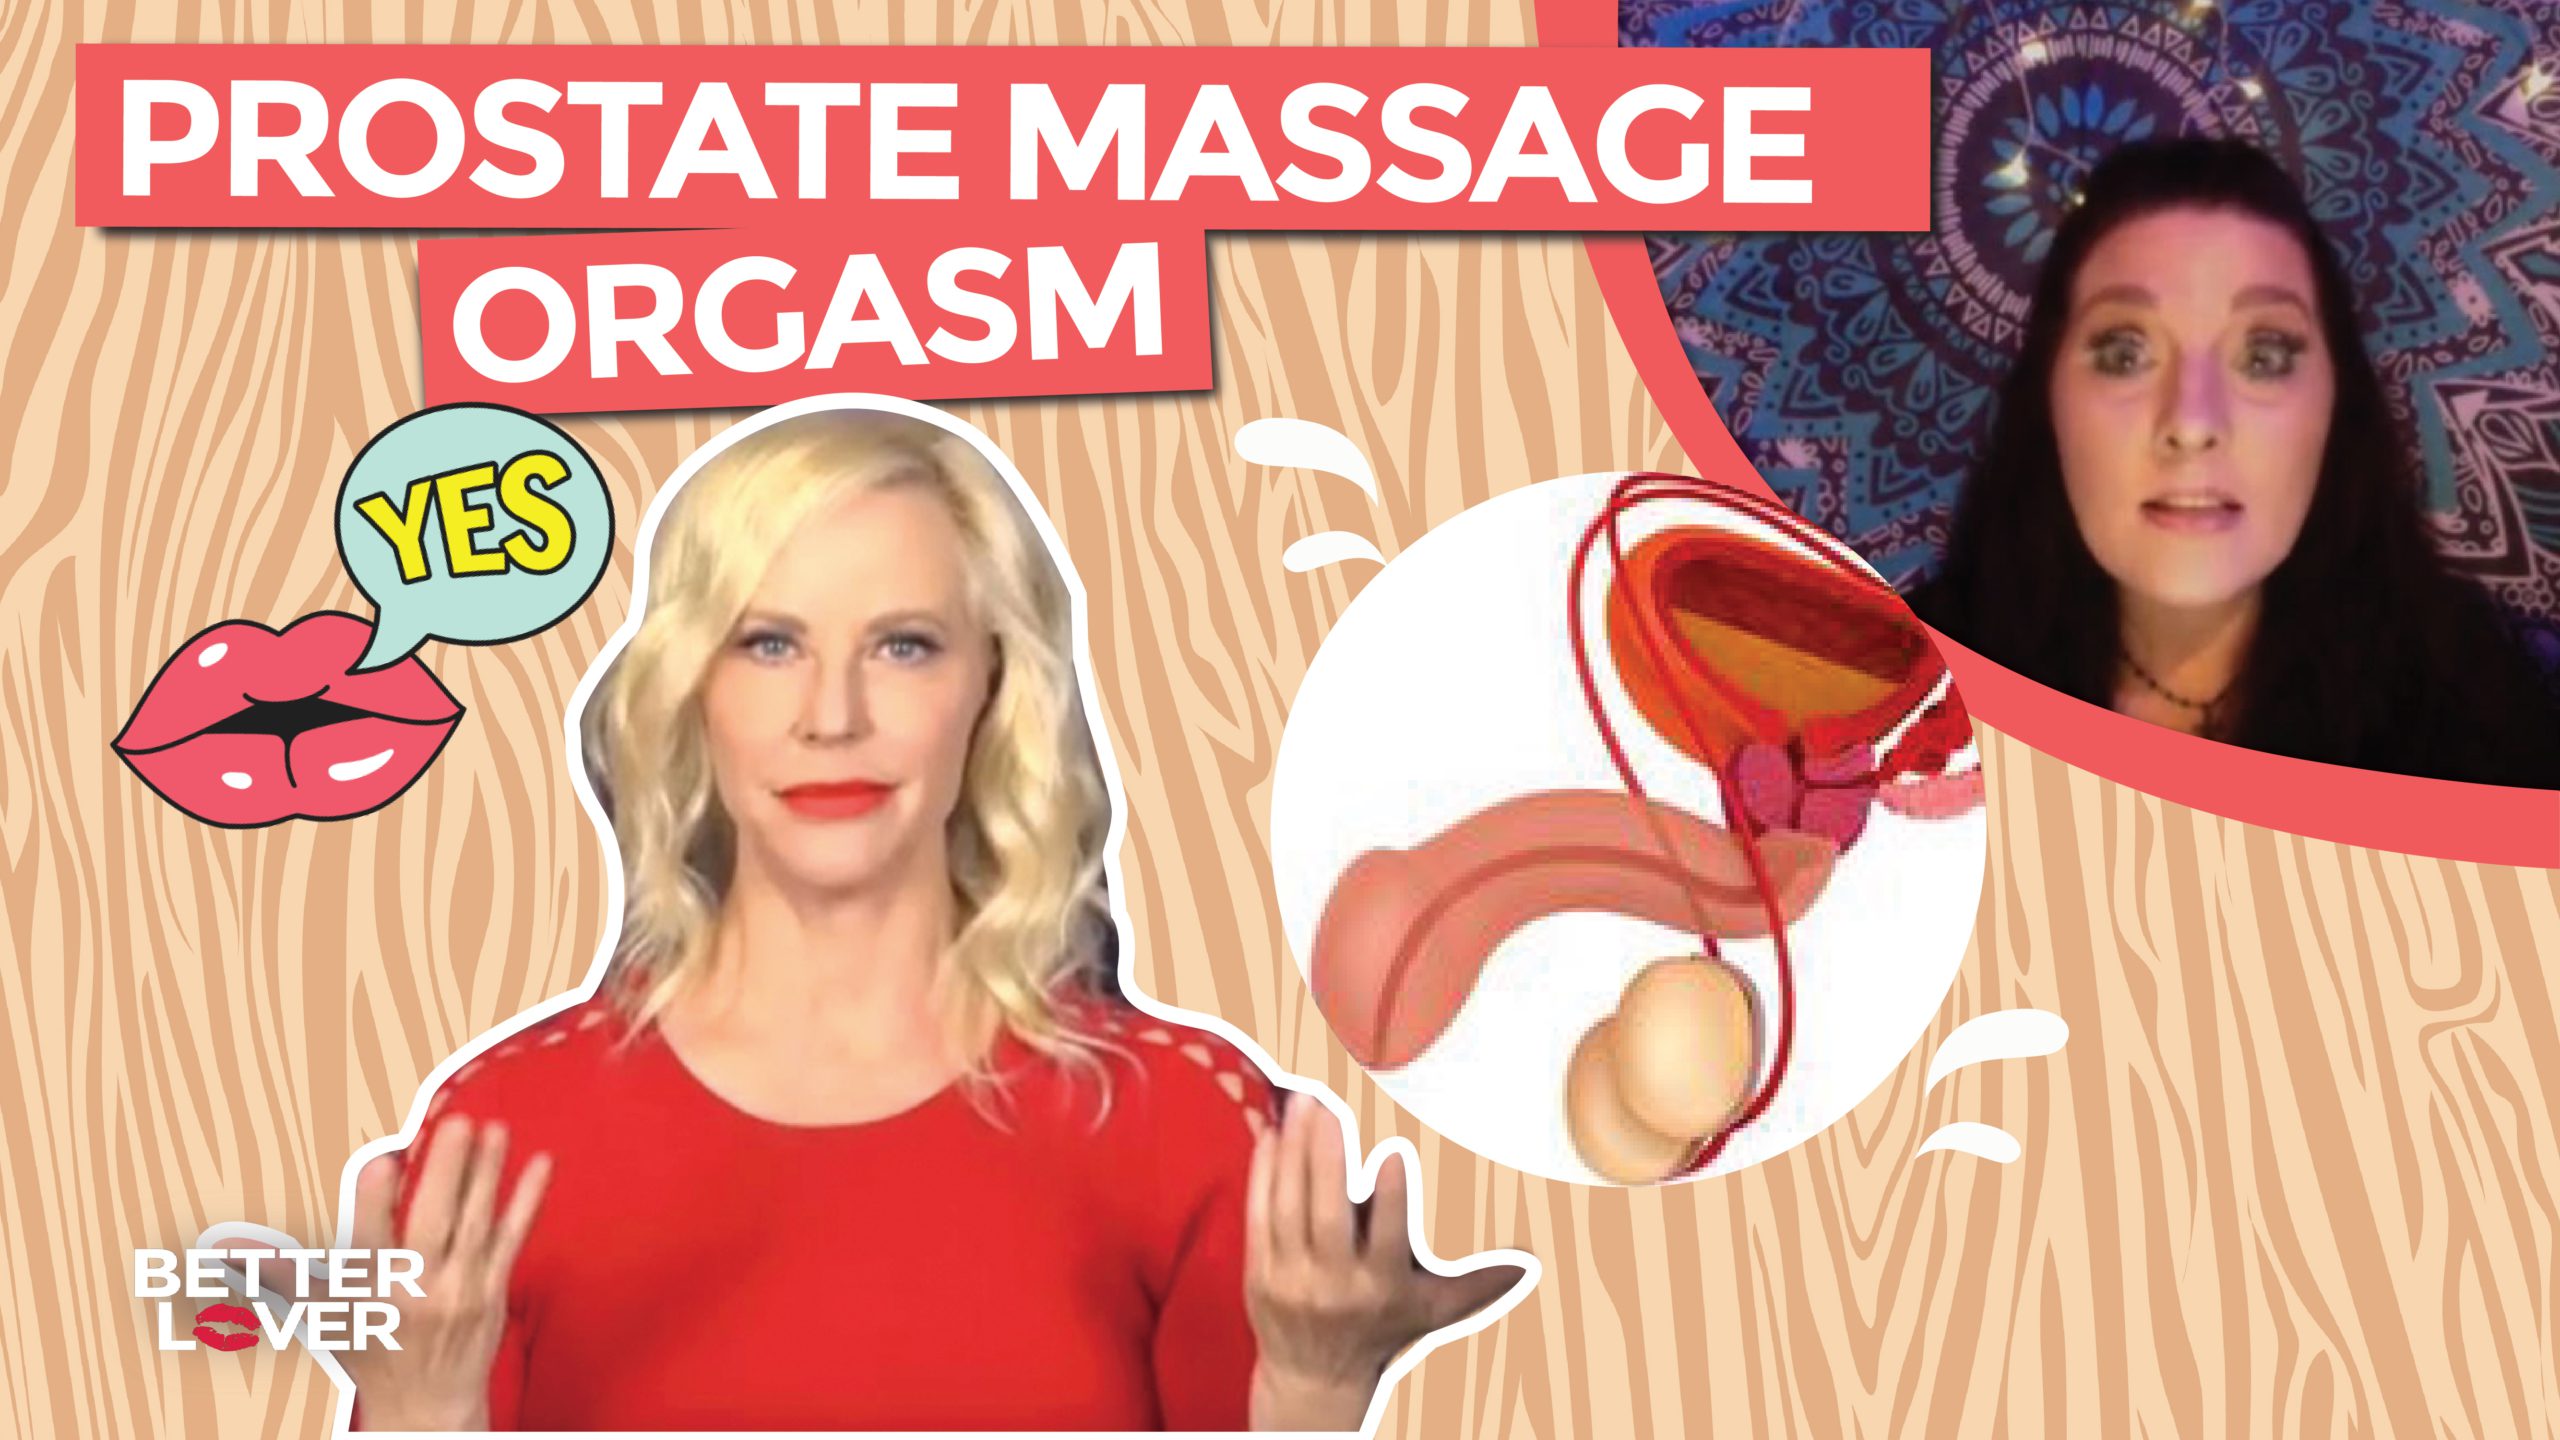 Prostate Massage, Prostate Orgasm, and The P-Spot